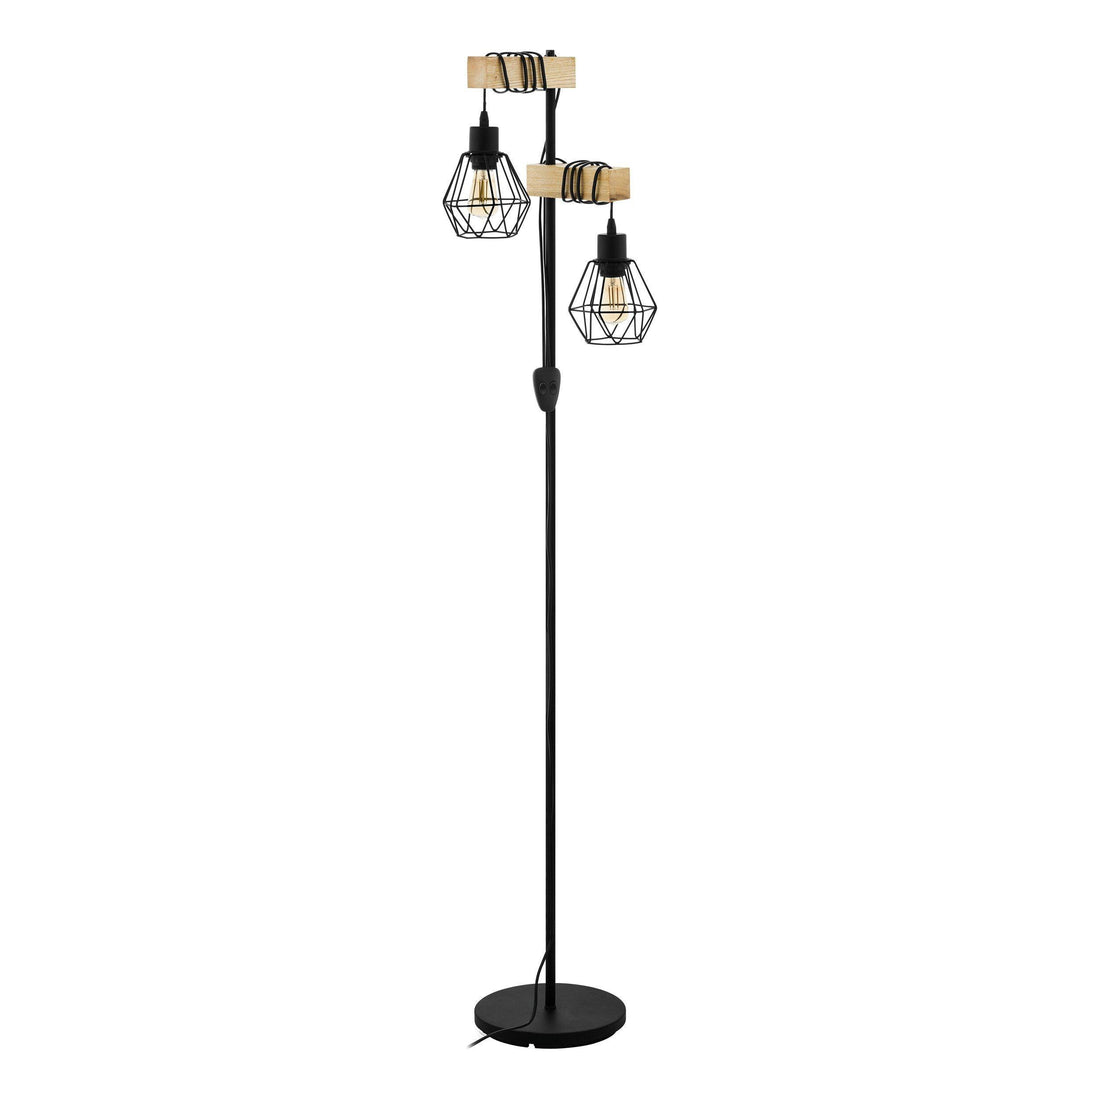 TOWNSHEND 5 FLoor Lamp by The Light Library